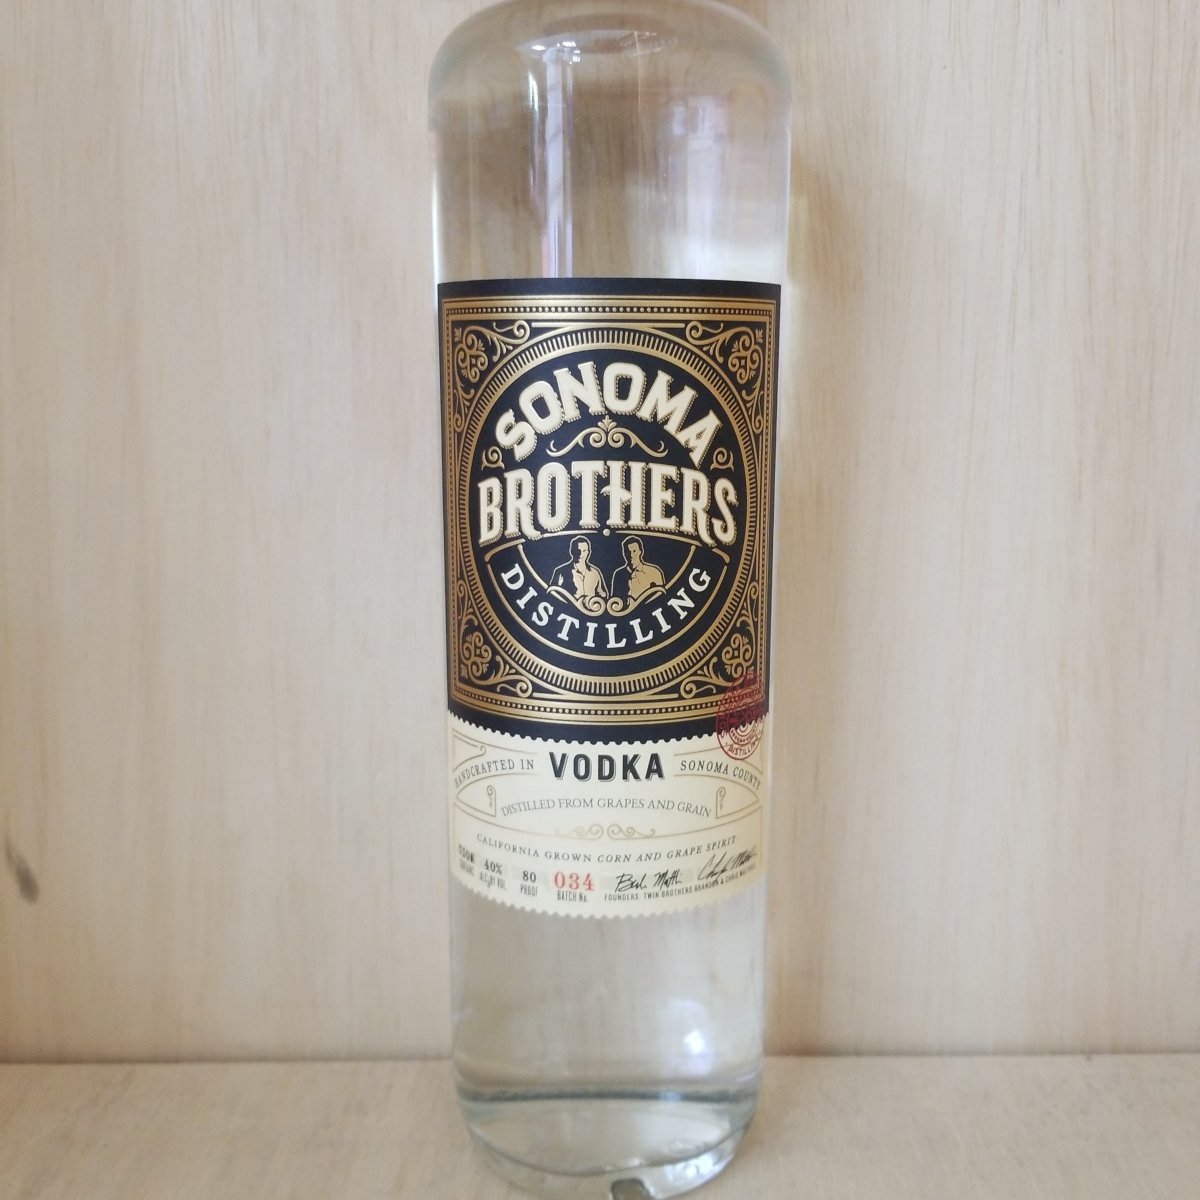 Sonoma Brothers Vodka 750ml (Better than Titos) Perfect for Engraving - Sip & Say